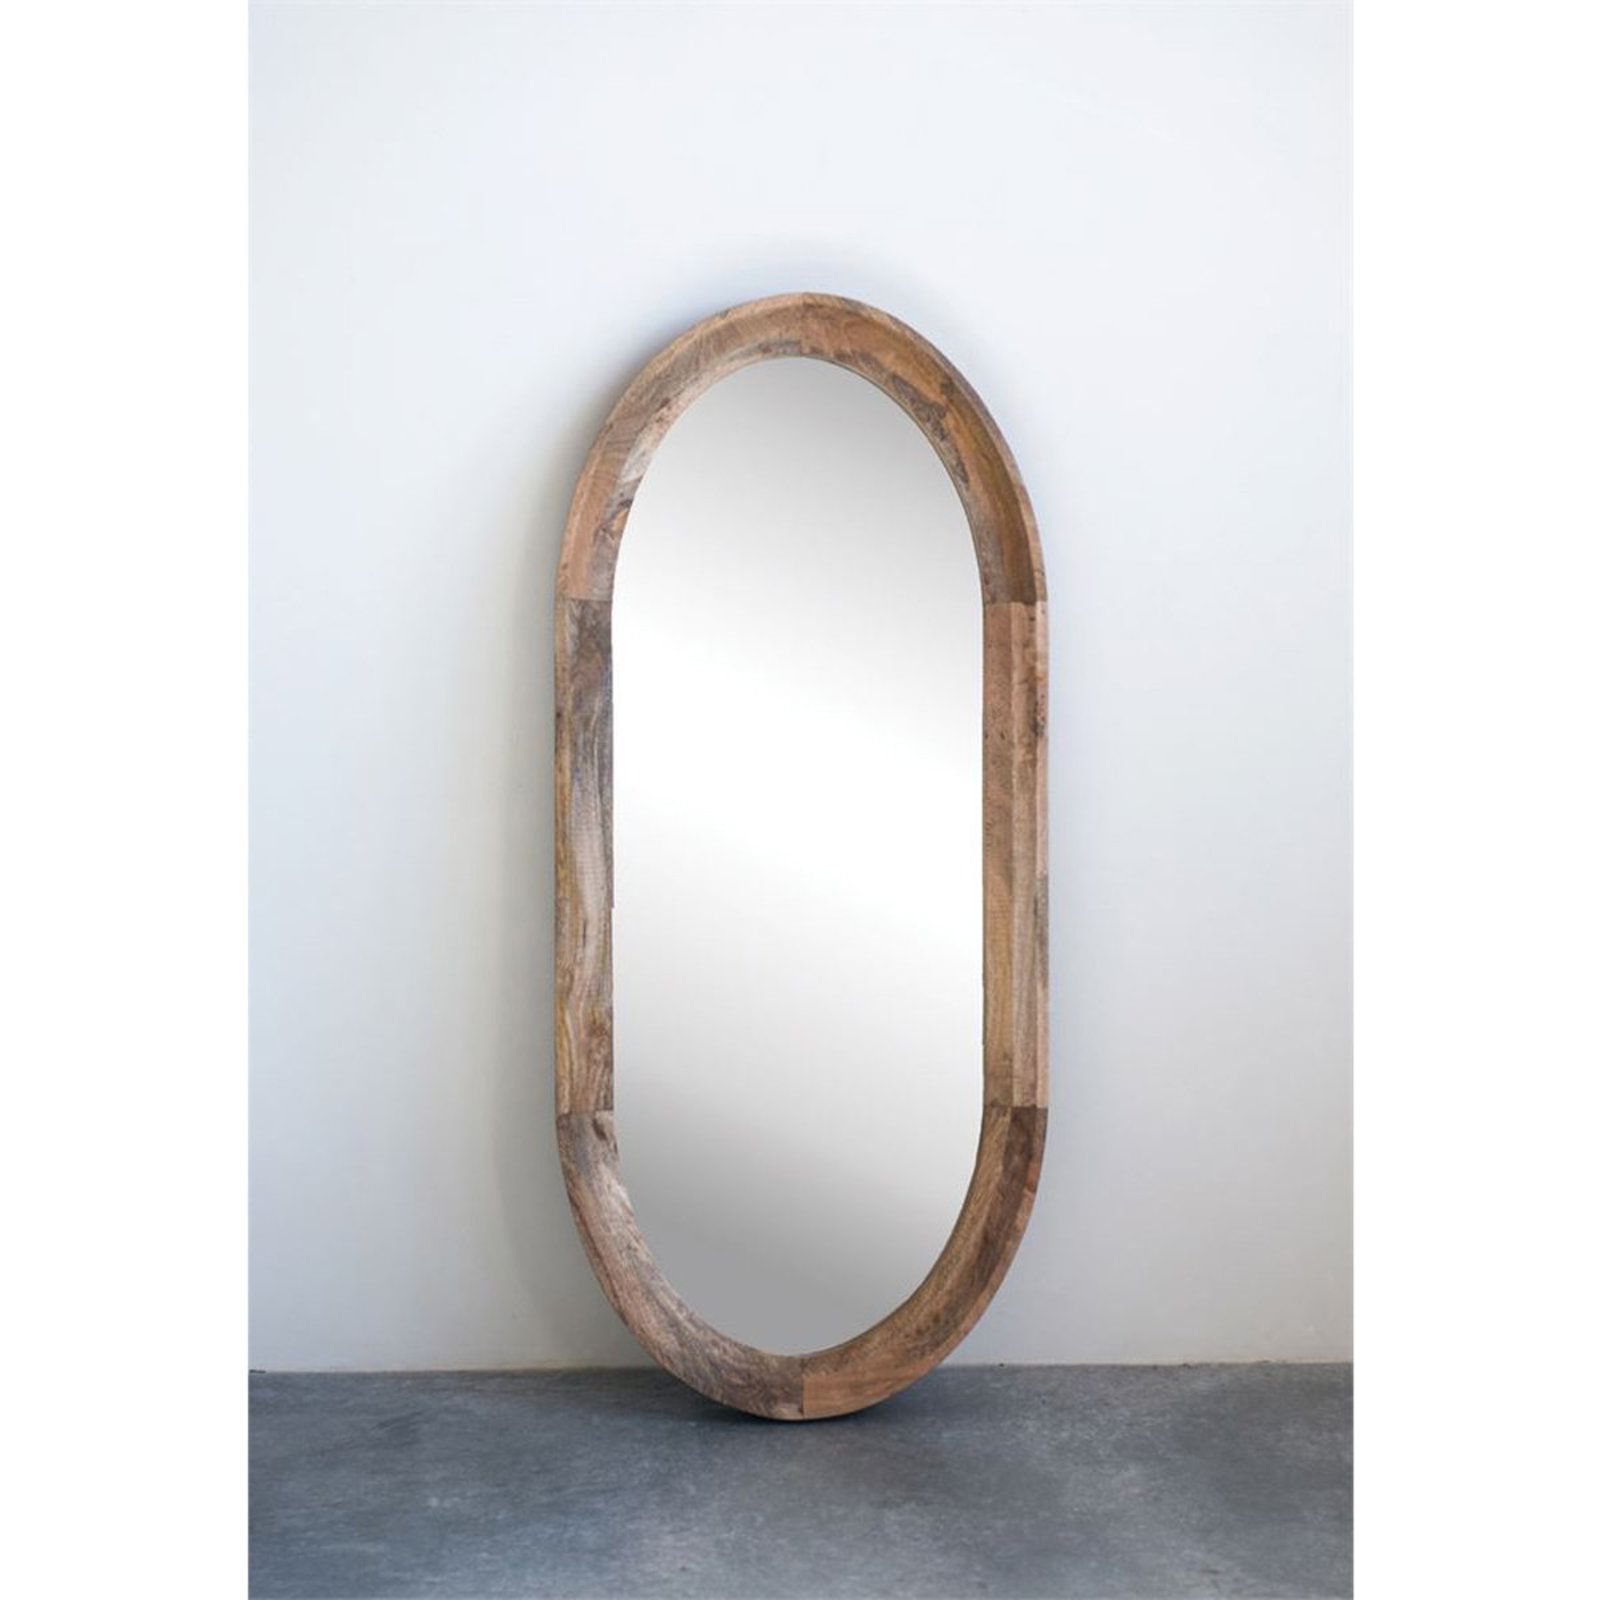 Oval Wall Mirror, Brown Wall Mirrors, Mirror Wall In Recent Wooden Oval Wall Mirrors (View 1 of 15)